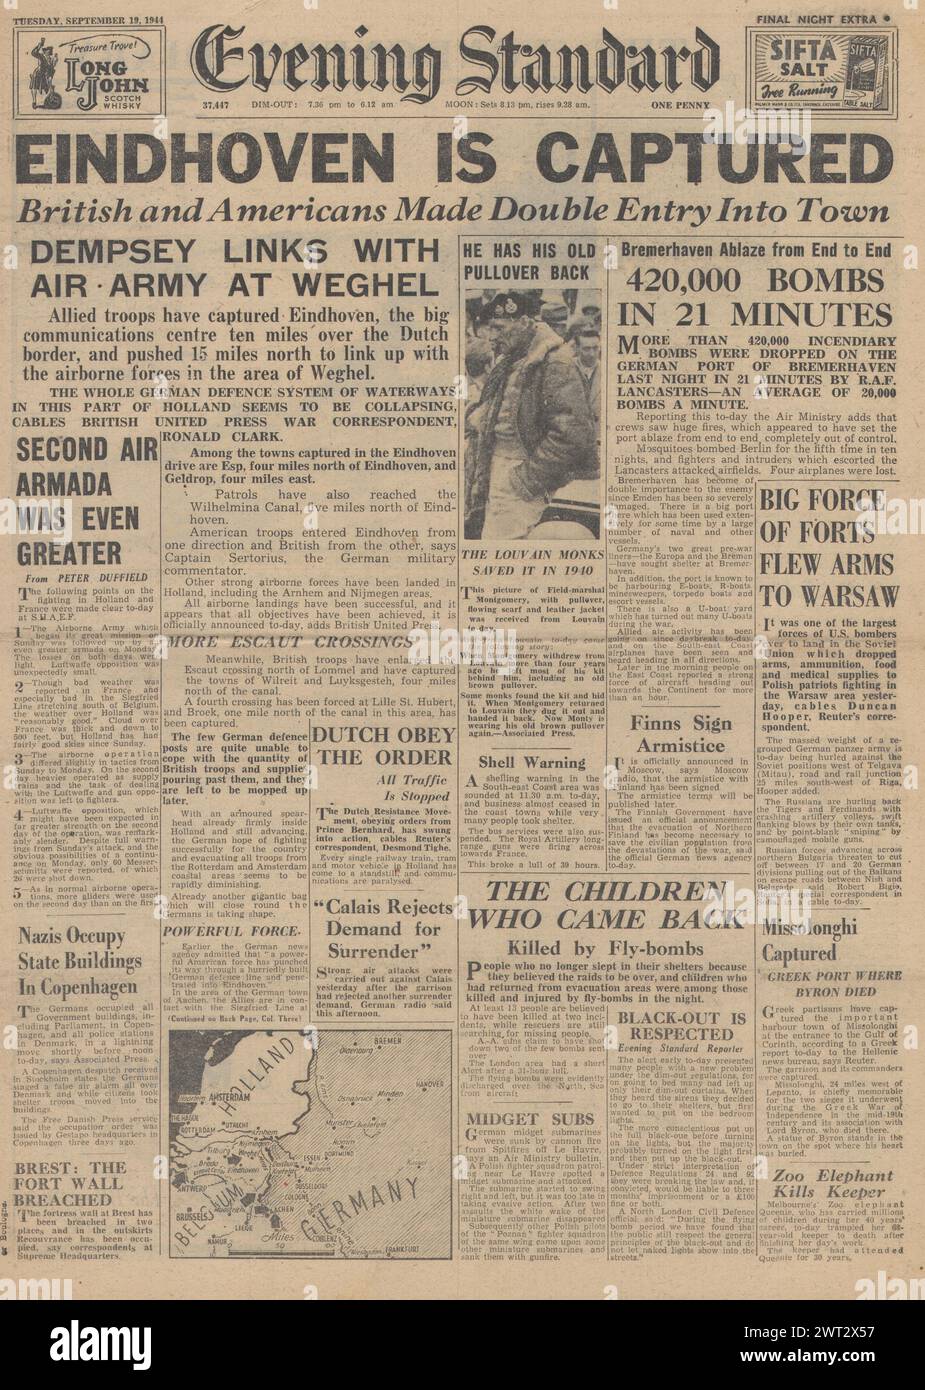 1944 Evening Standard front page reporting Battle of Arnhem, capture of Eindhoven and bombing of Bremerhaven Stock Photo